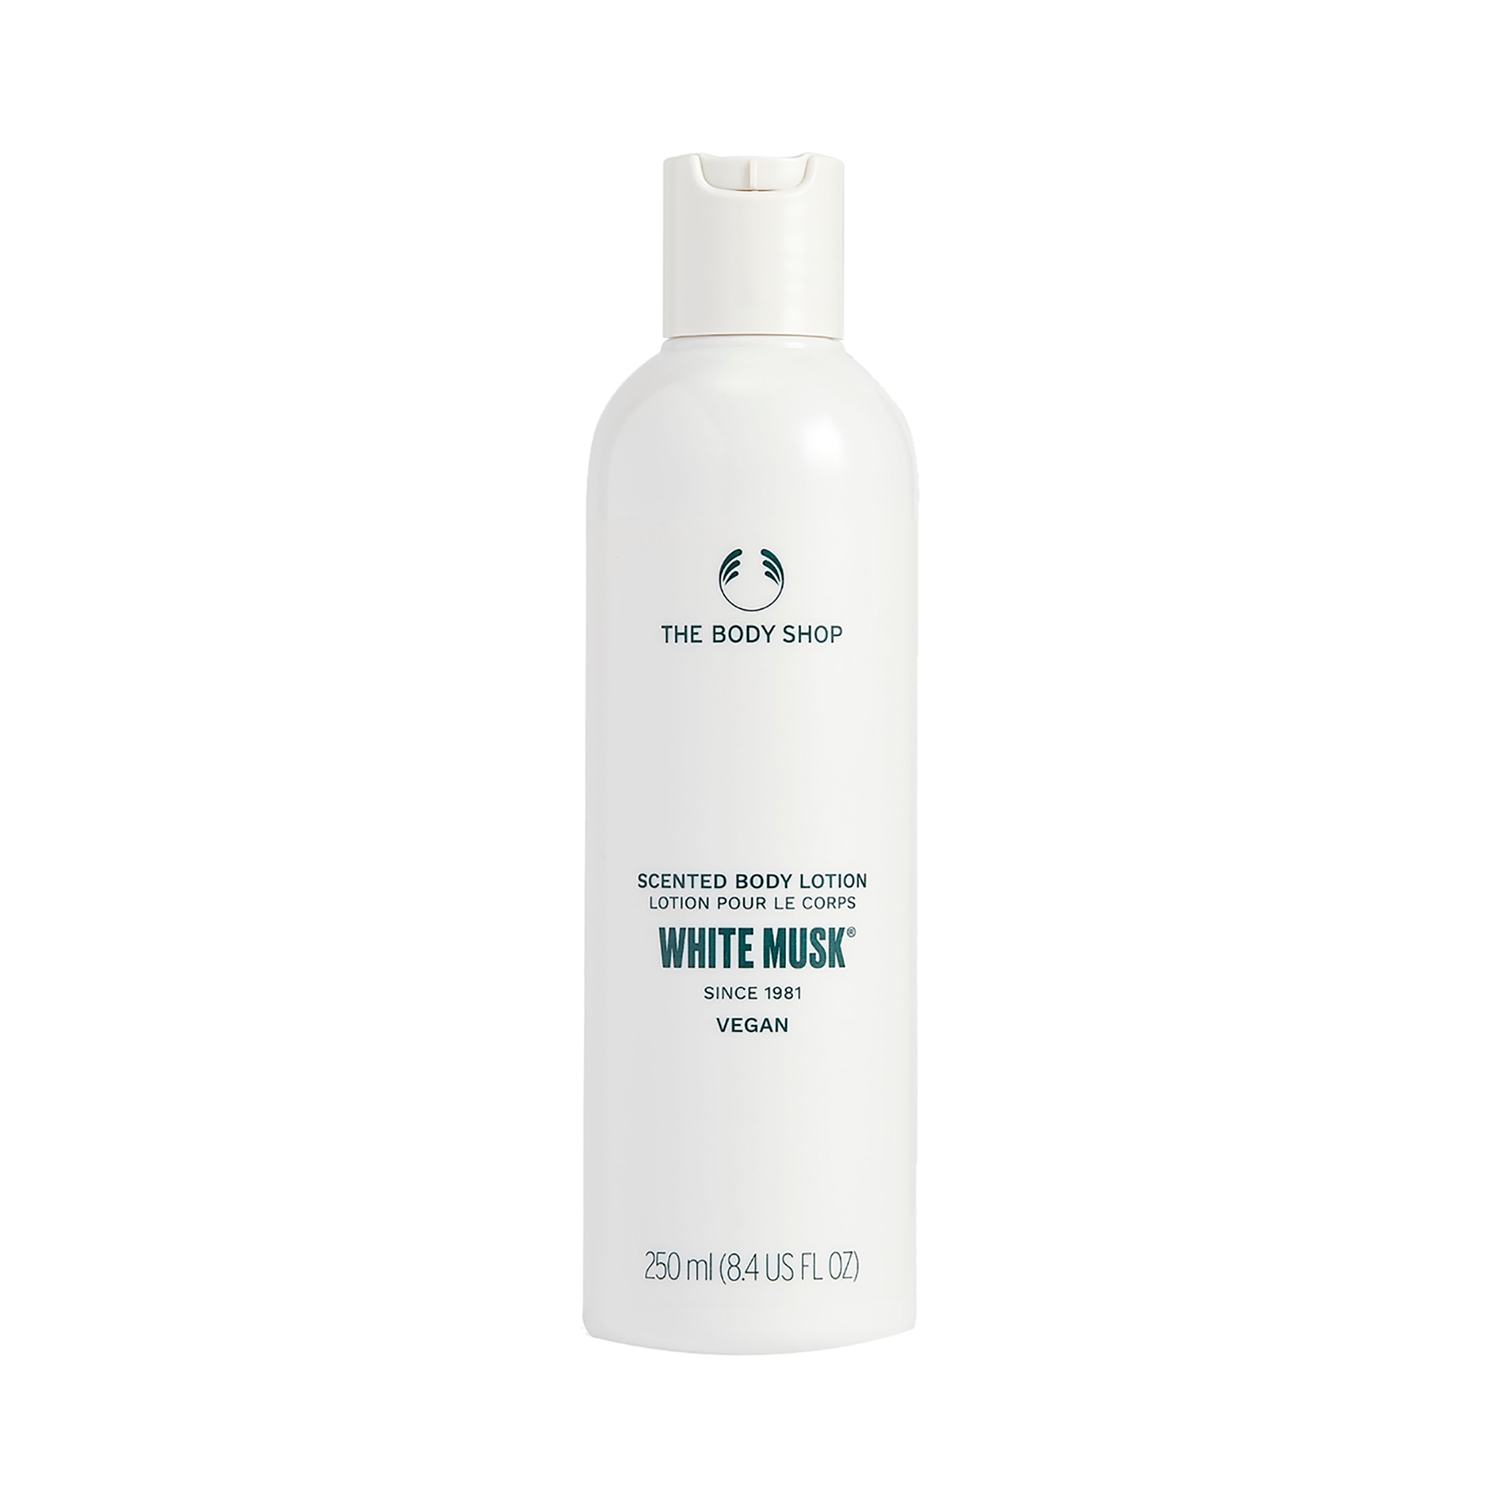 The Body Shop | The Body Shop White Musk Body Lotion (250ml)